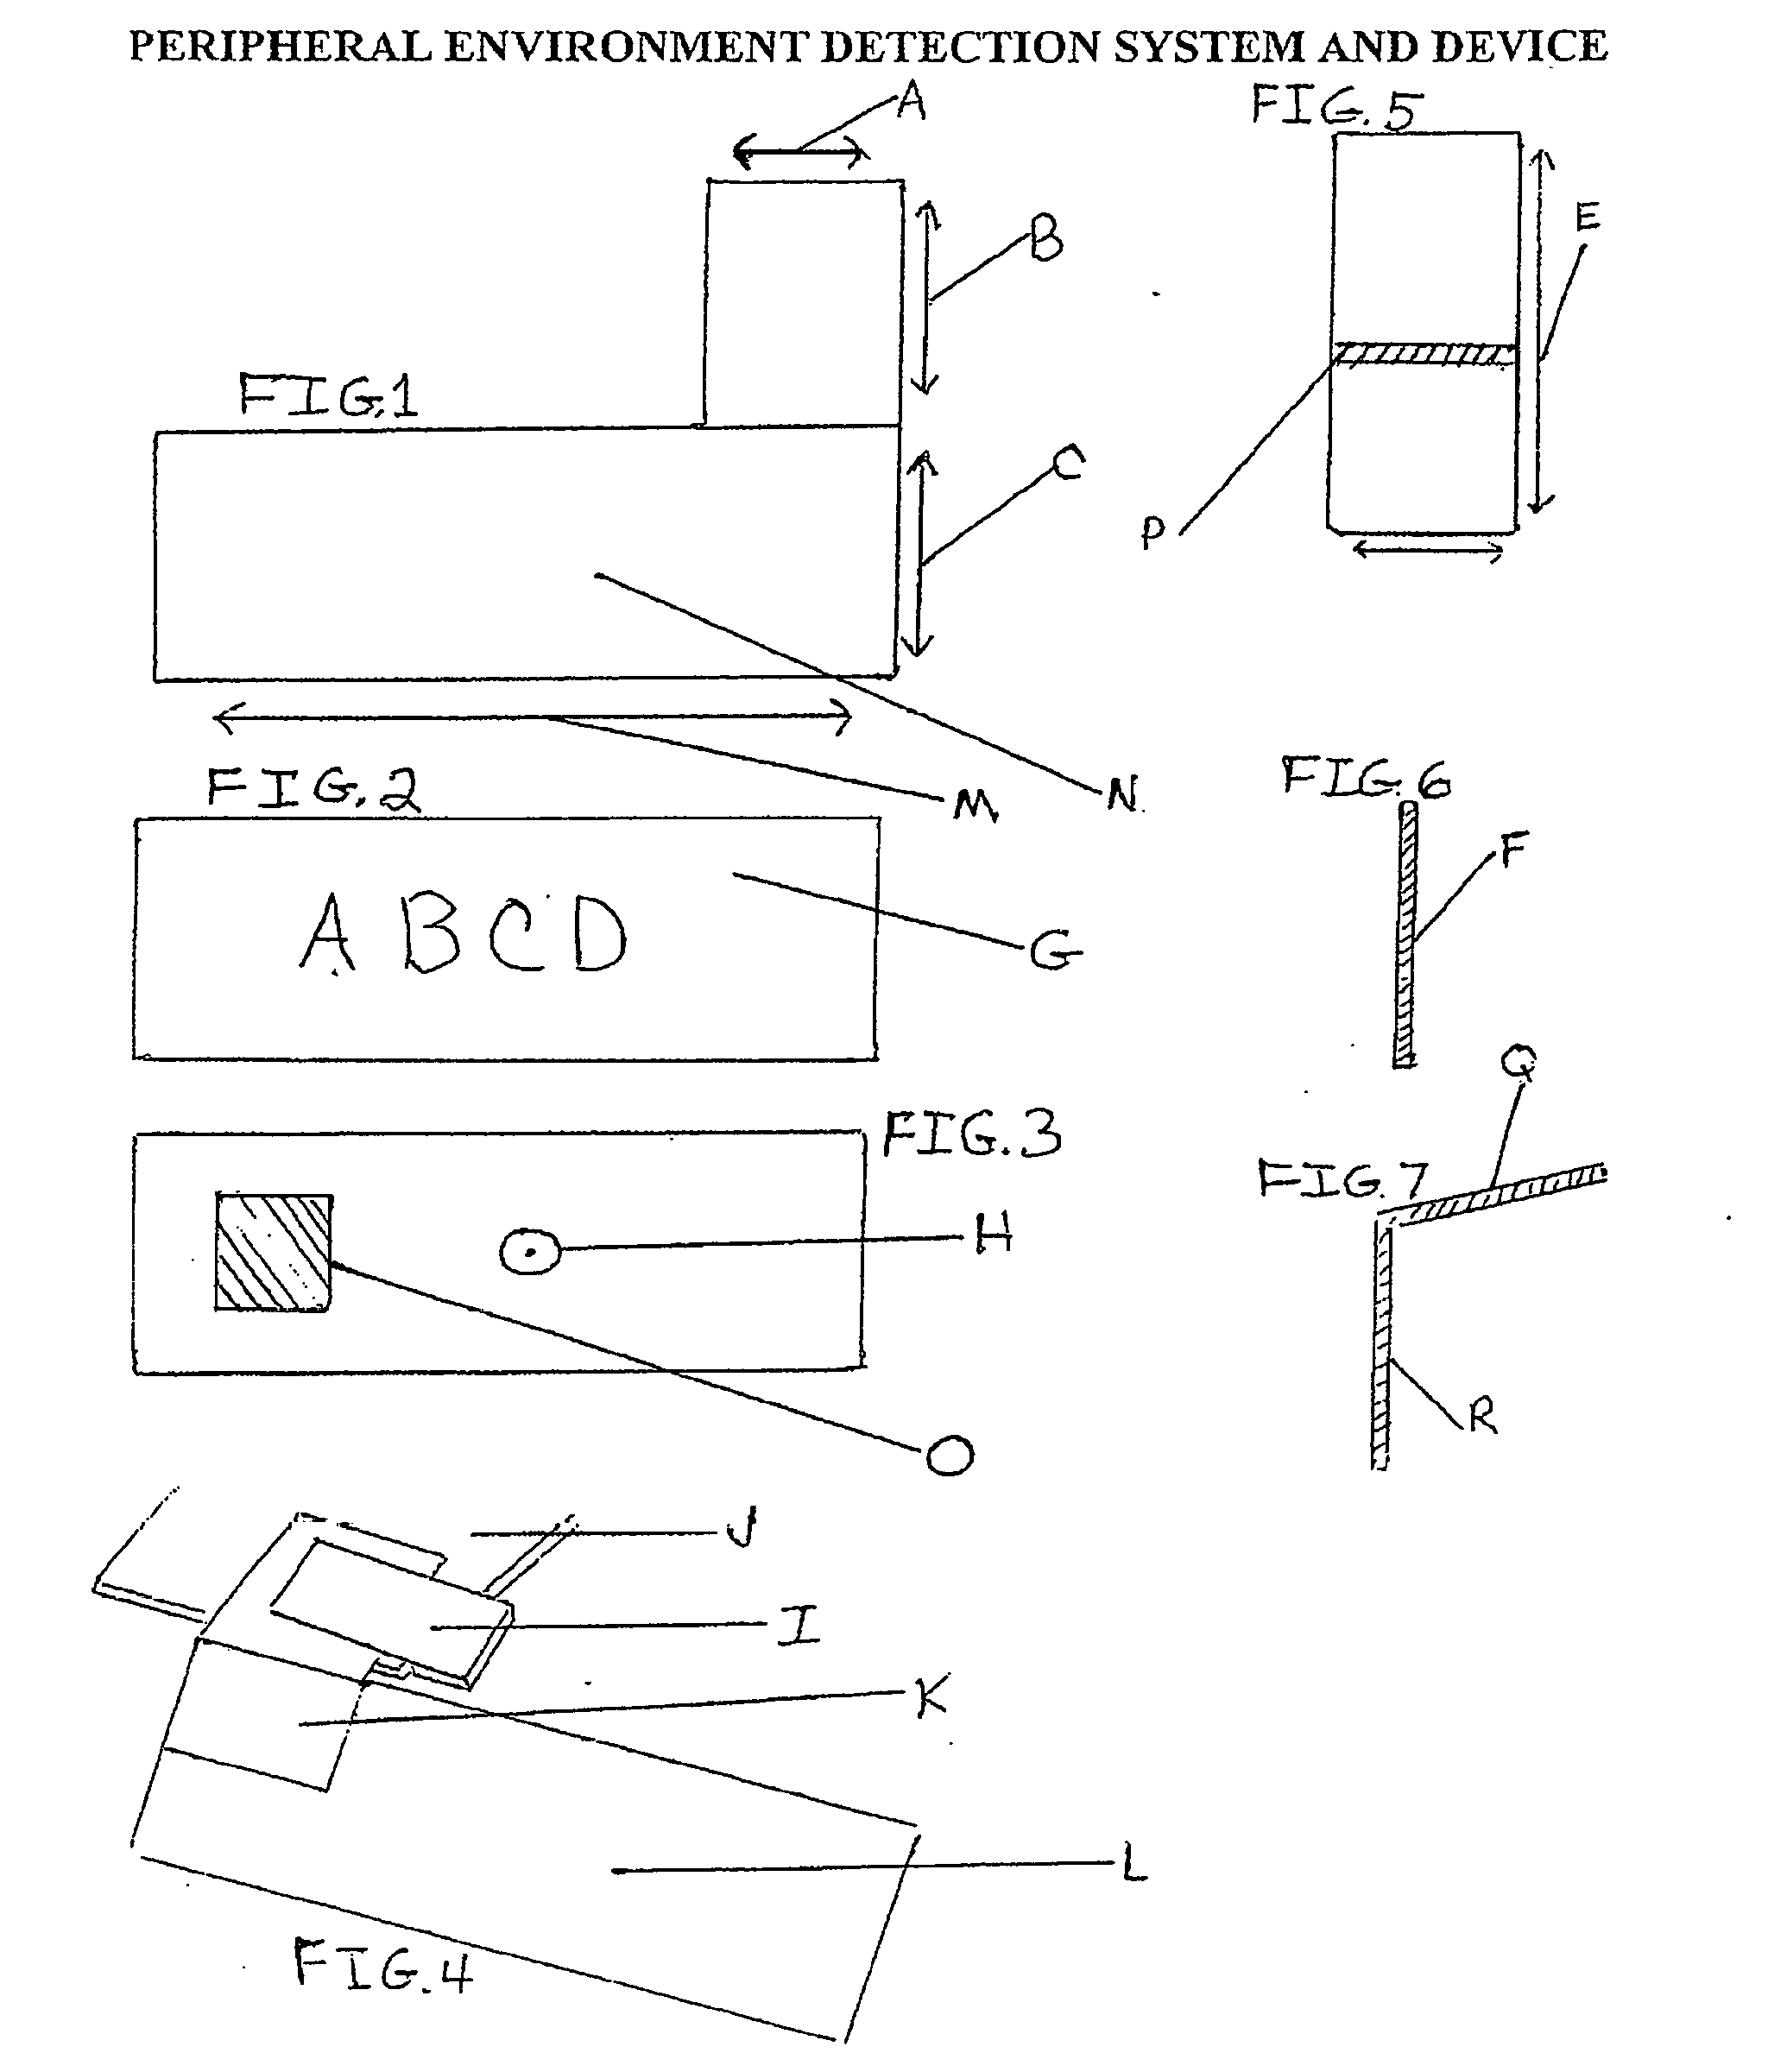 Peripheral environment detection system and device